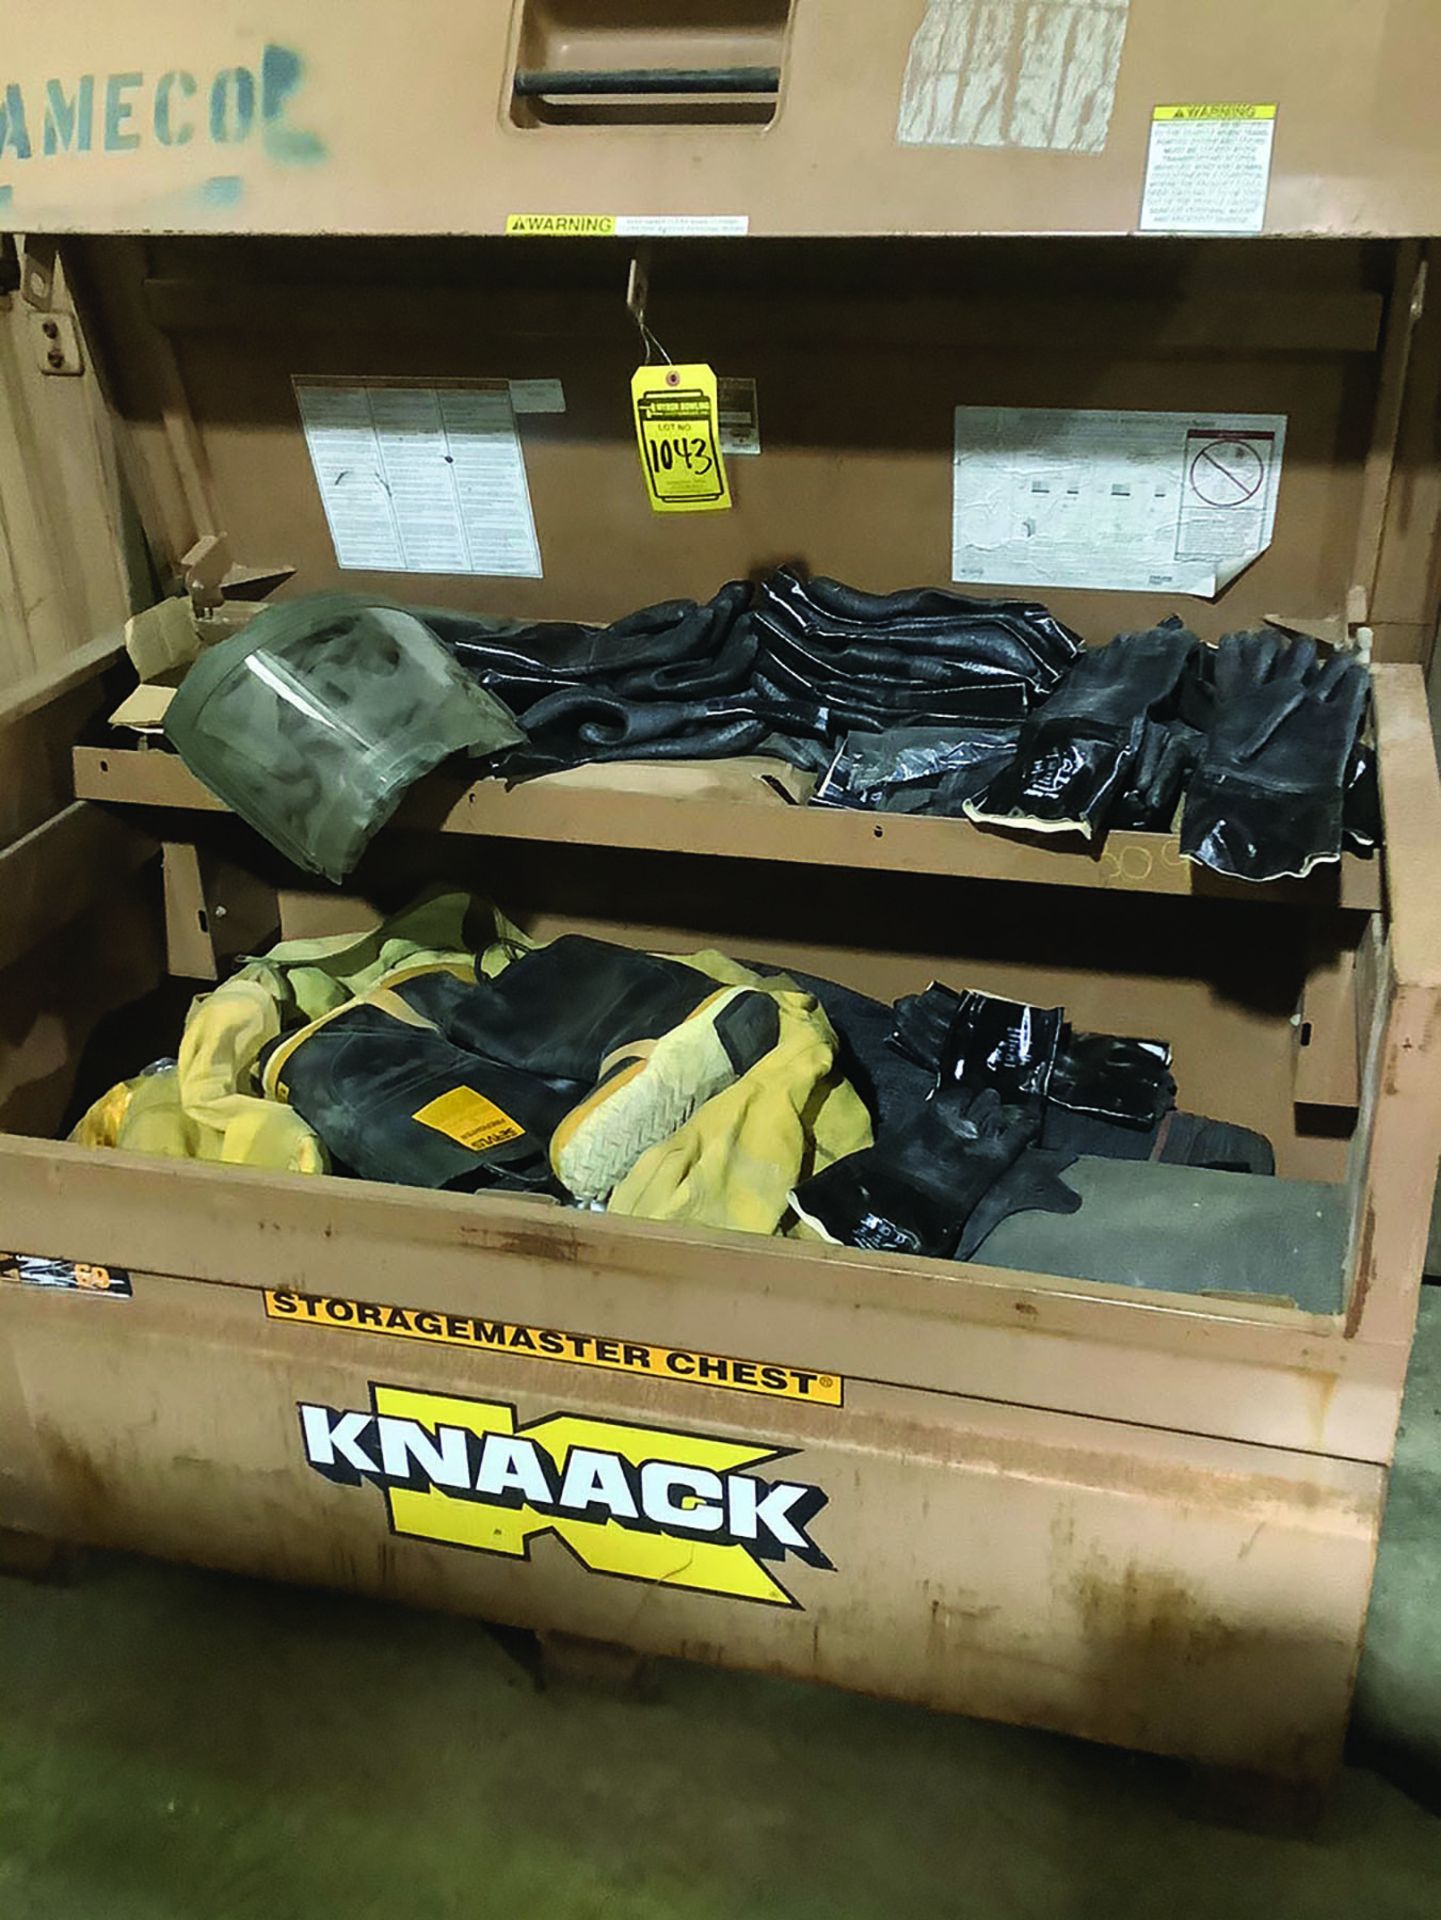 KNAACK MODEL 69 GANG BOX WITH CONTENTS - Image 2 of 3